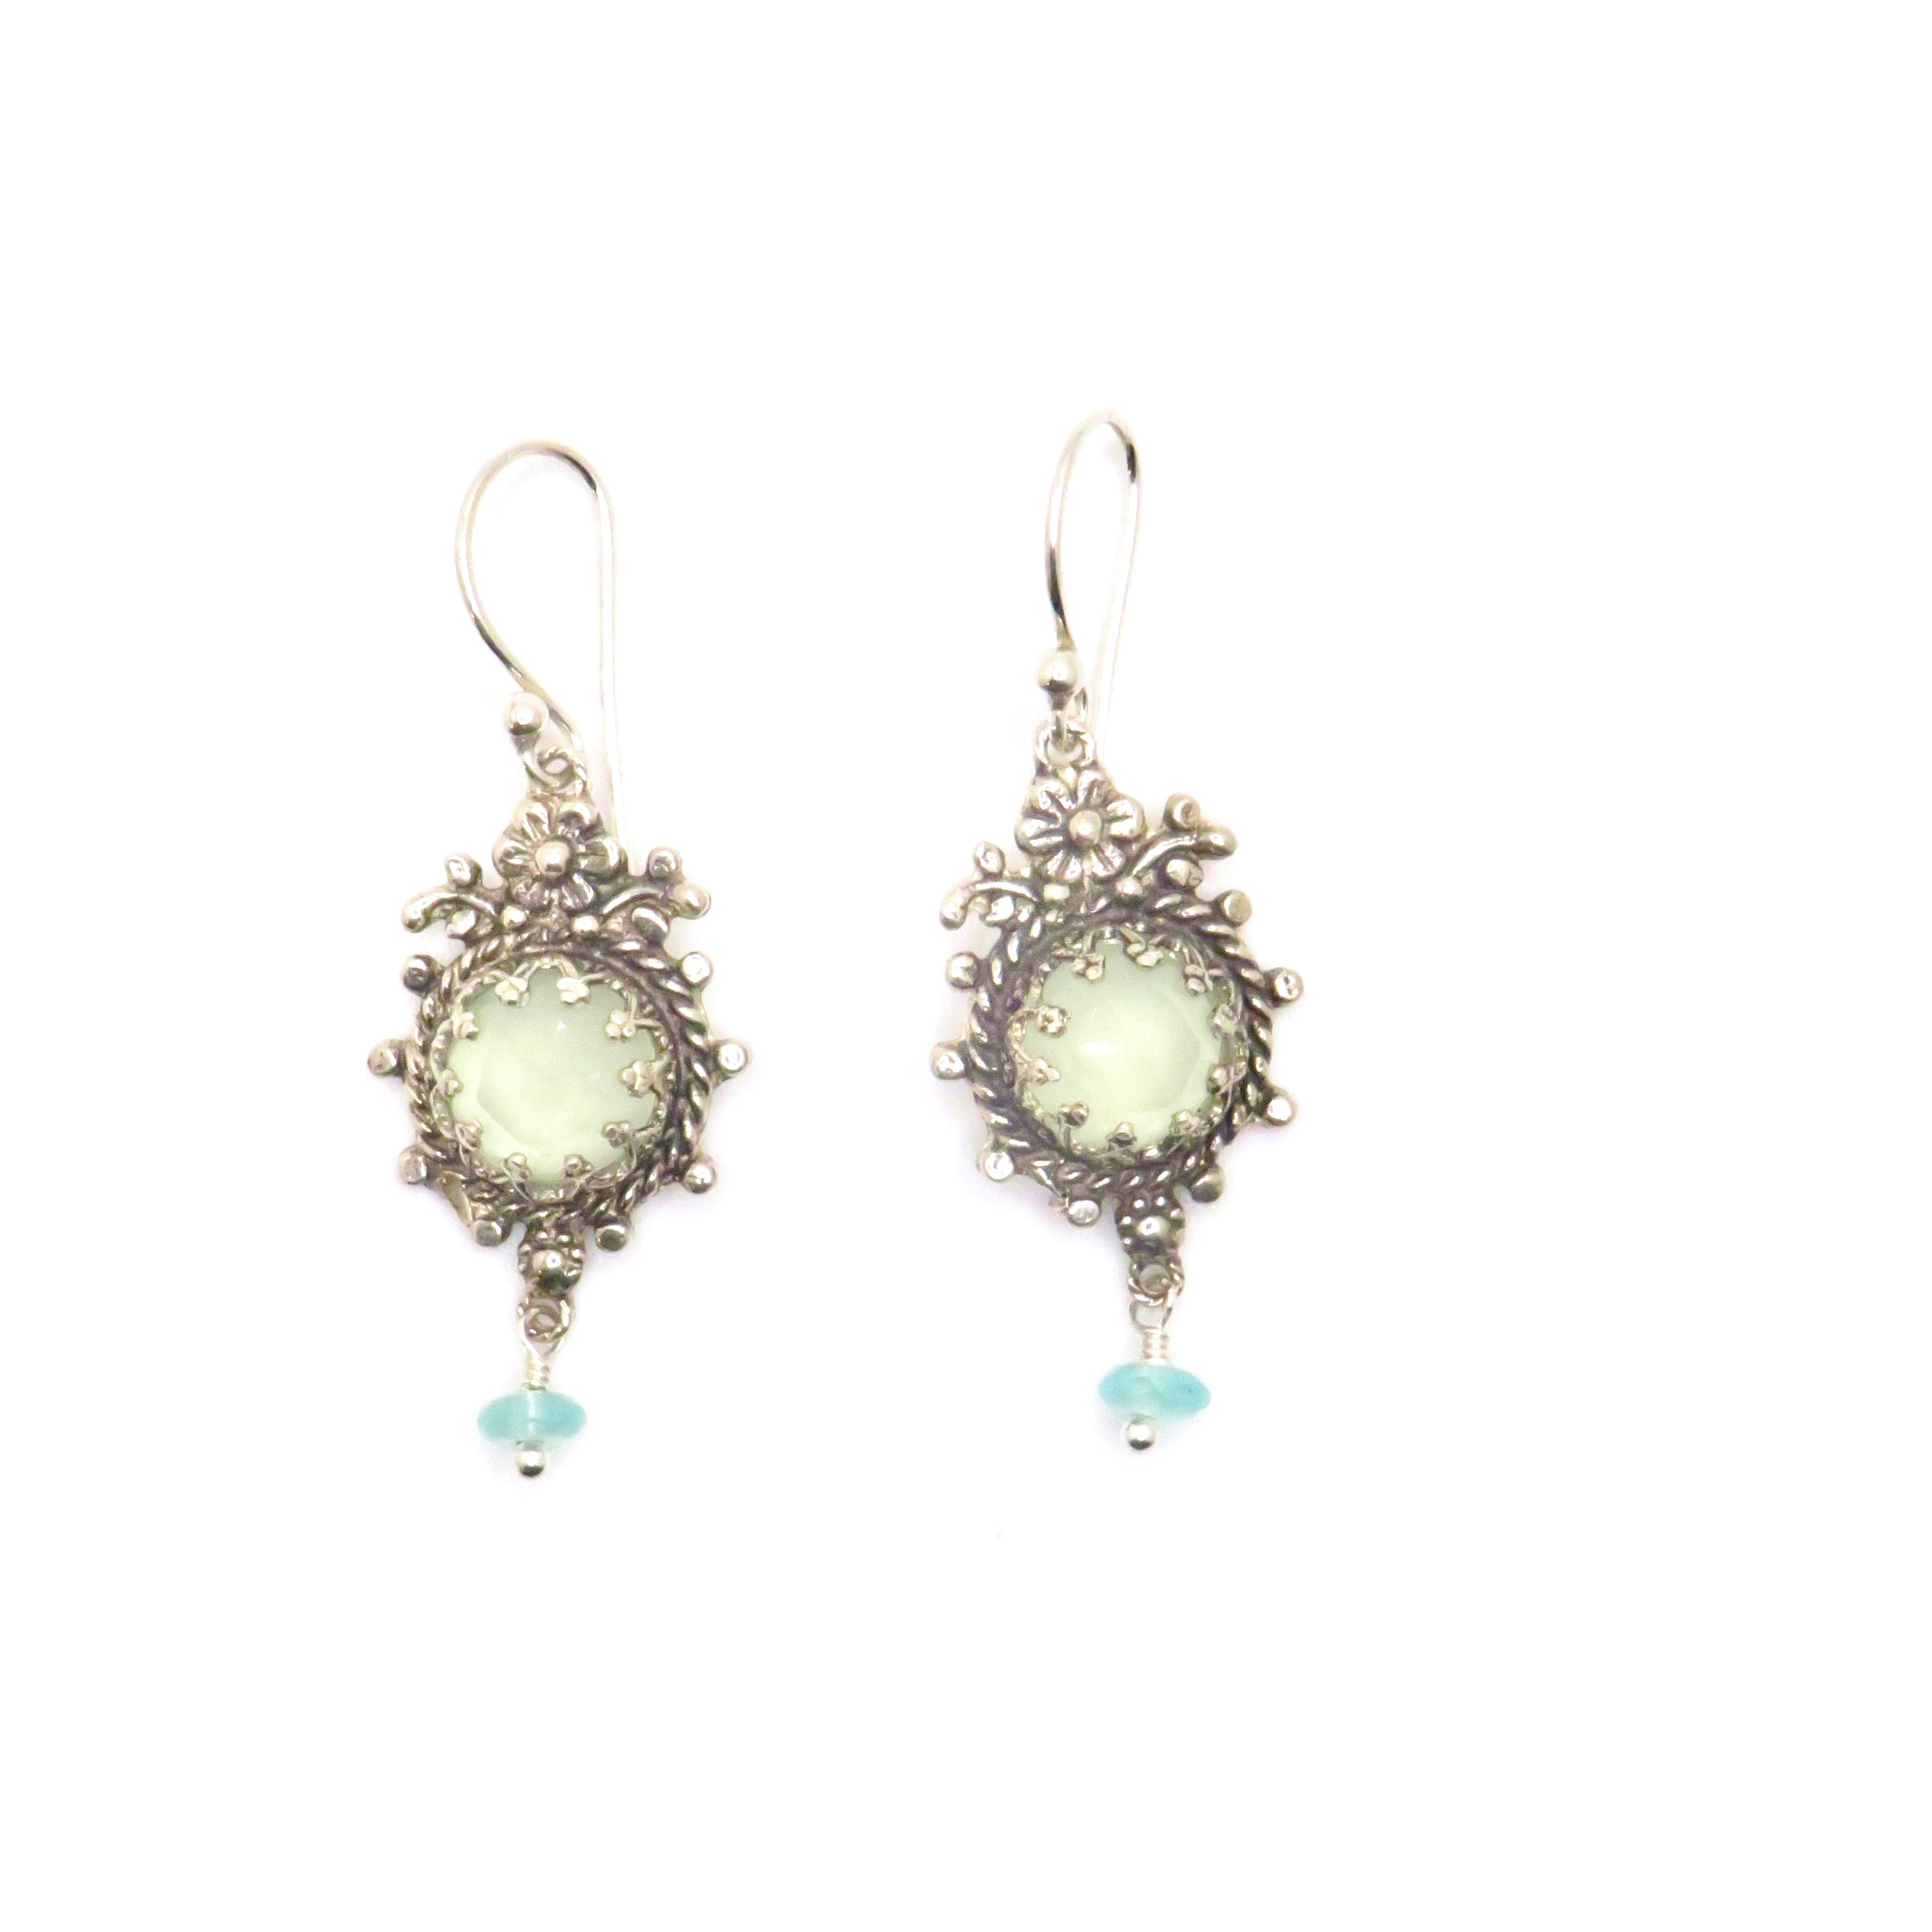 Aqua Chalcedony and Sterling Silver Filigree Daisy Earrings